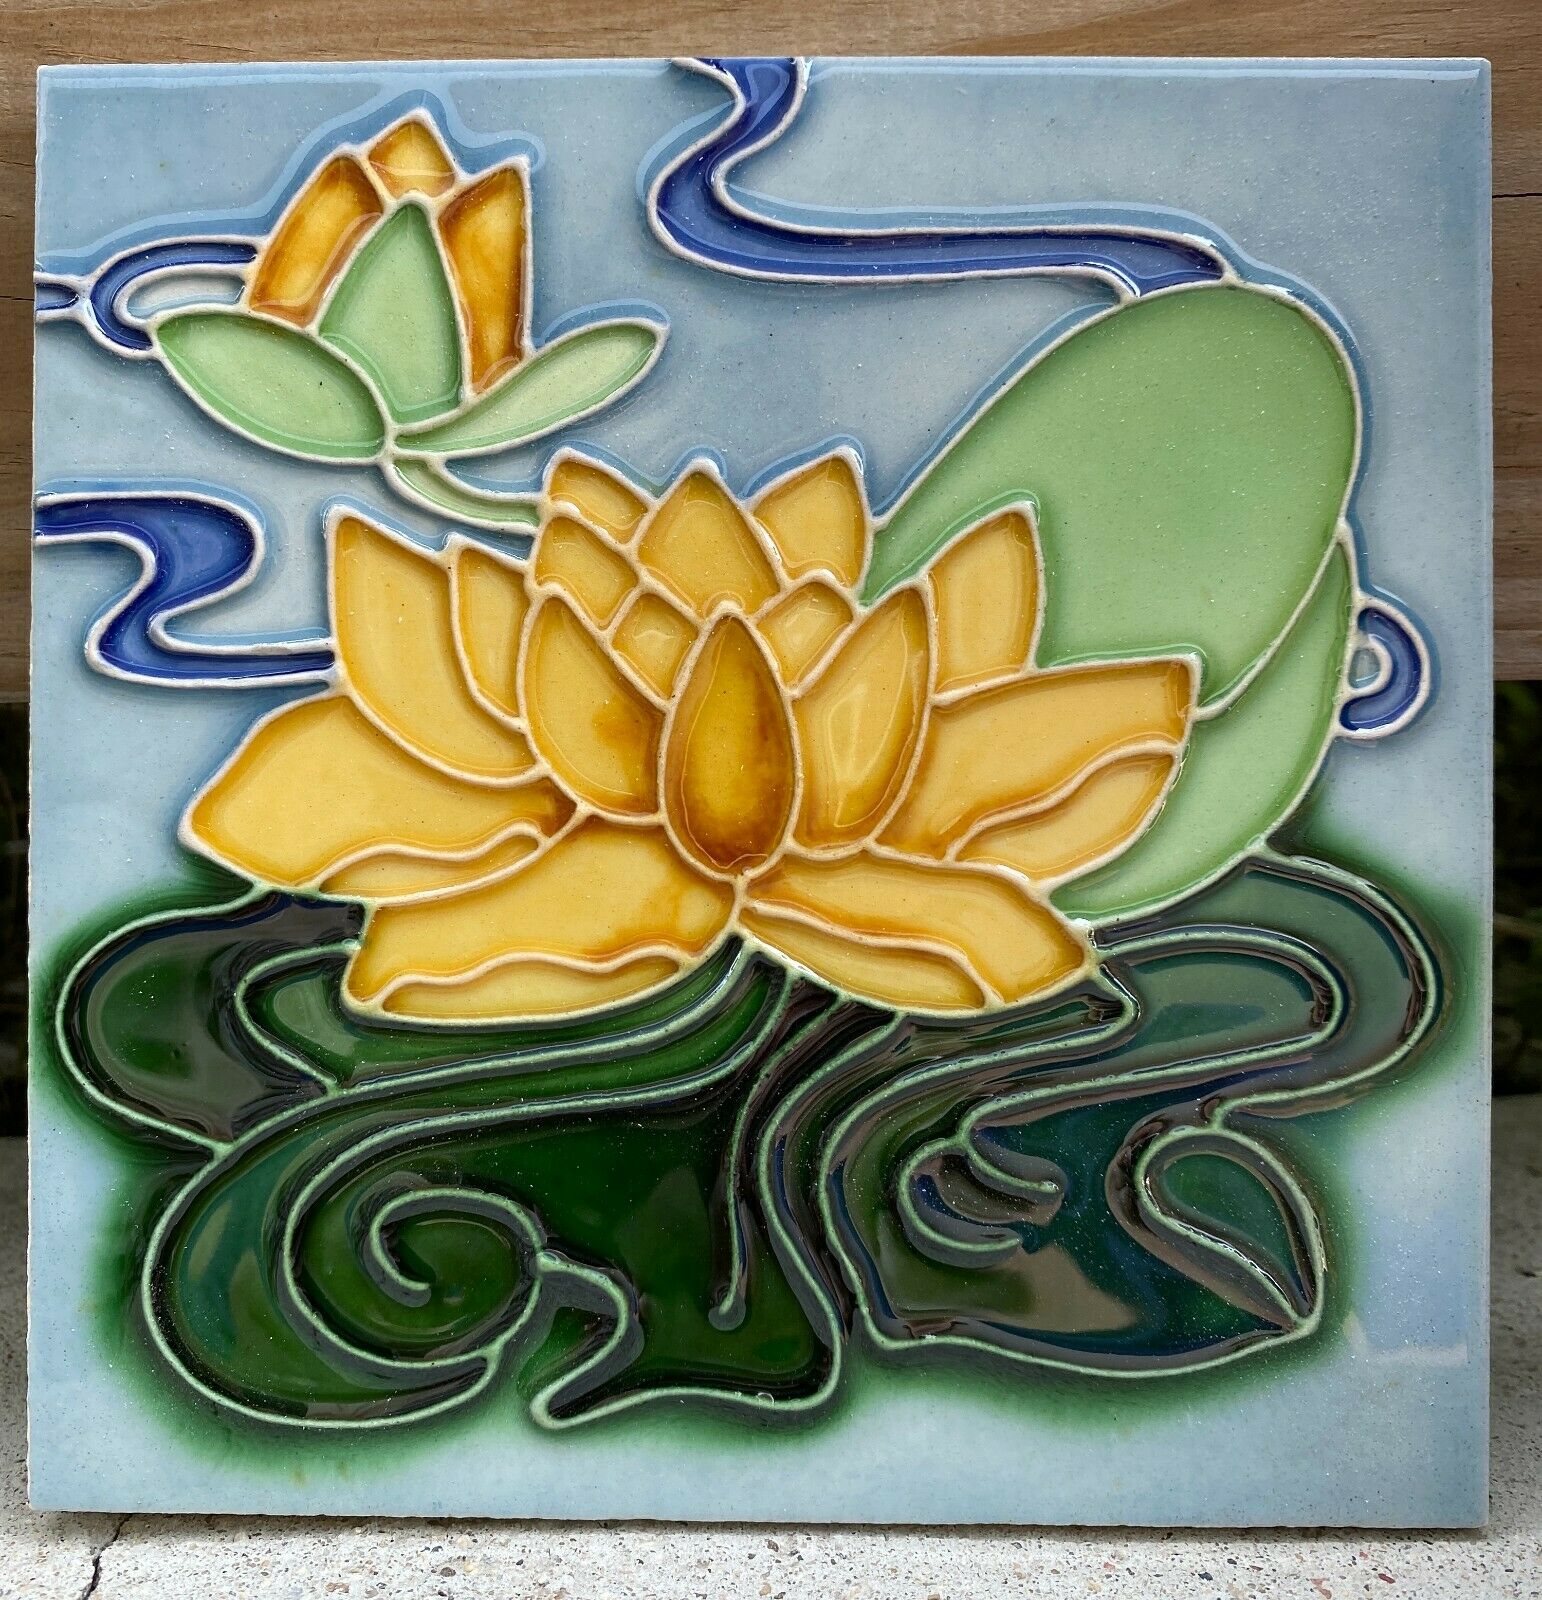 Rare Art Nouveau Majolica Tile Embossed 6 X 6 Inch Lilly Pad Tile #9